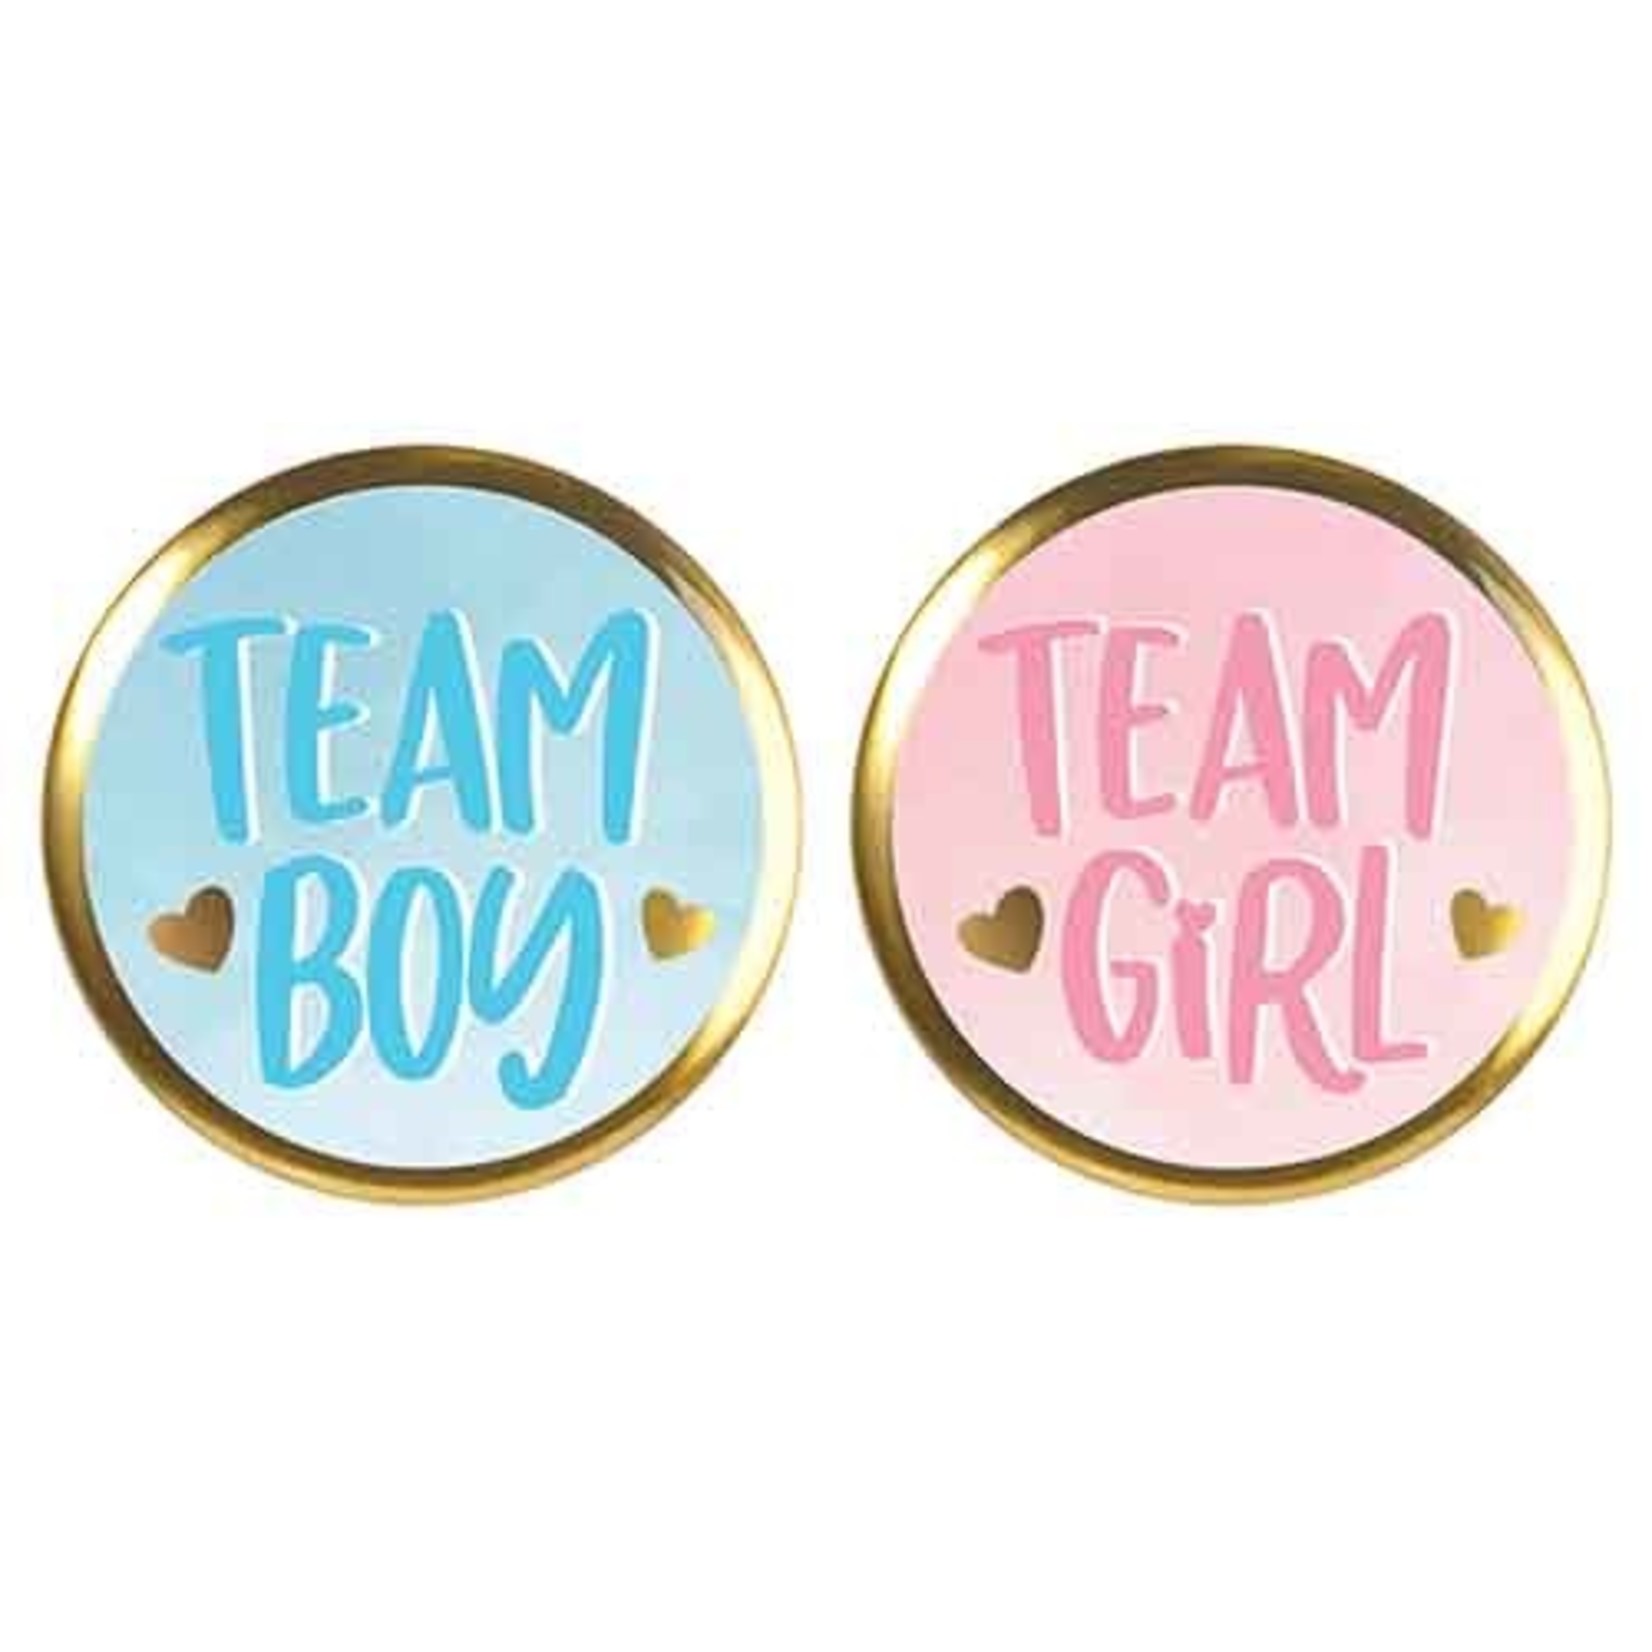 Amscan Team Boy and Team Girl Buttons -10pcs.